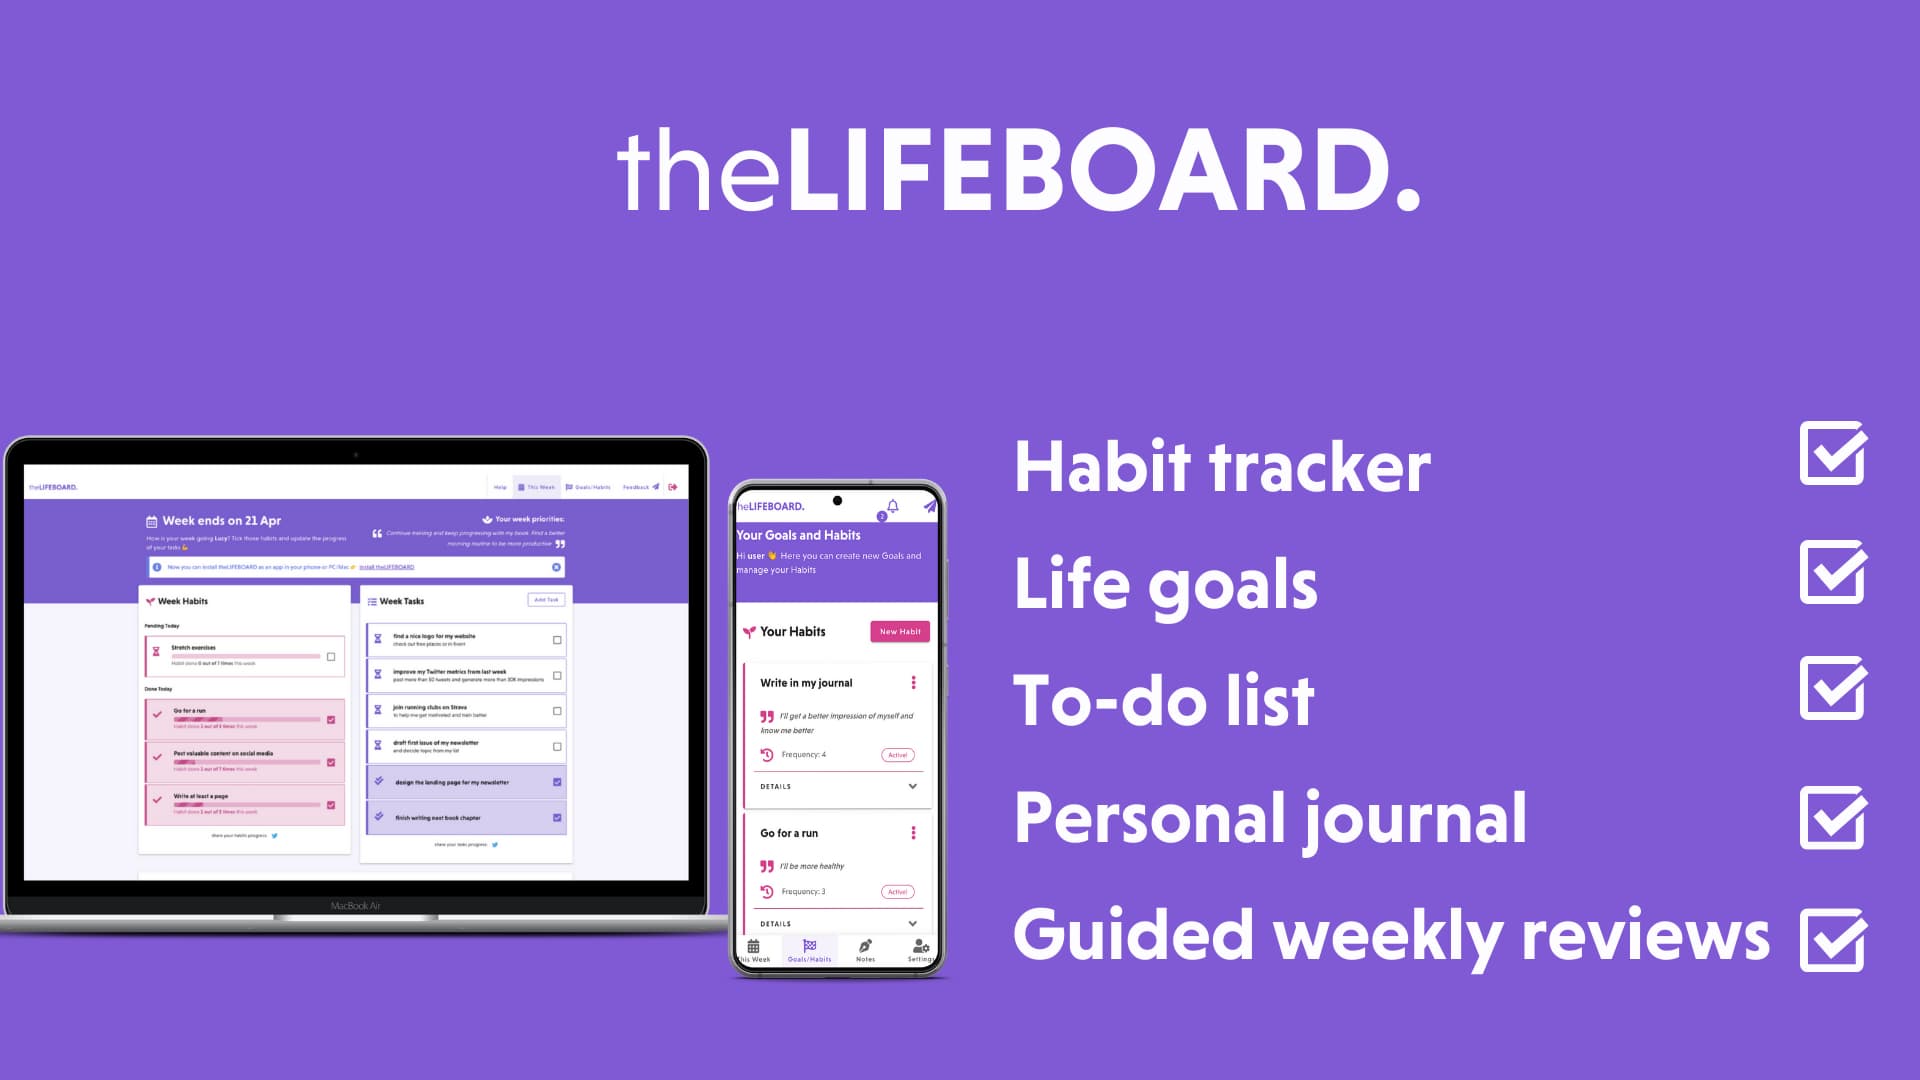 theLIFEBOARD user dashboard